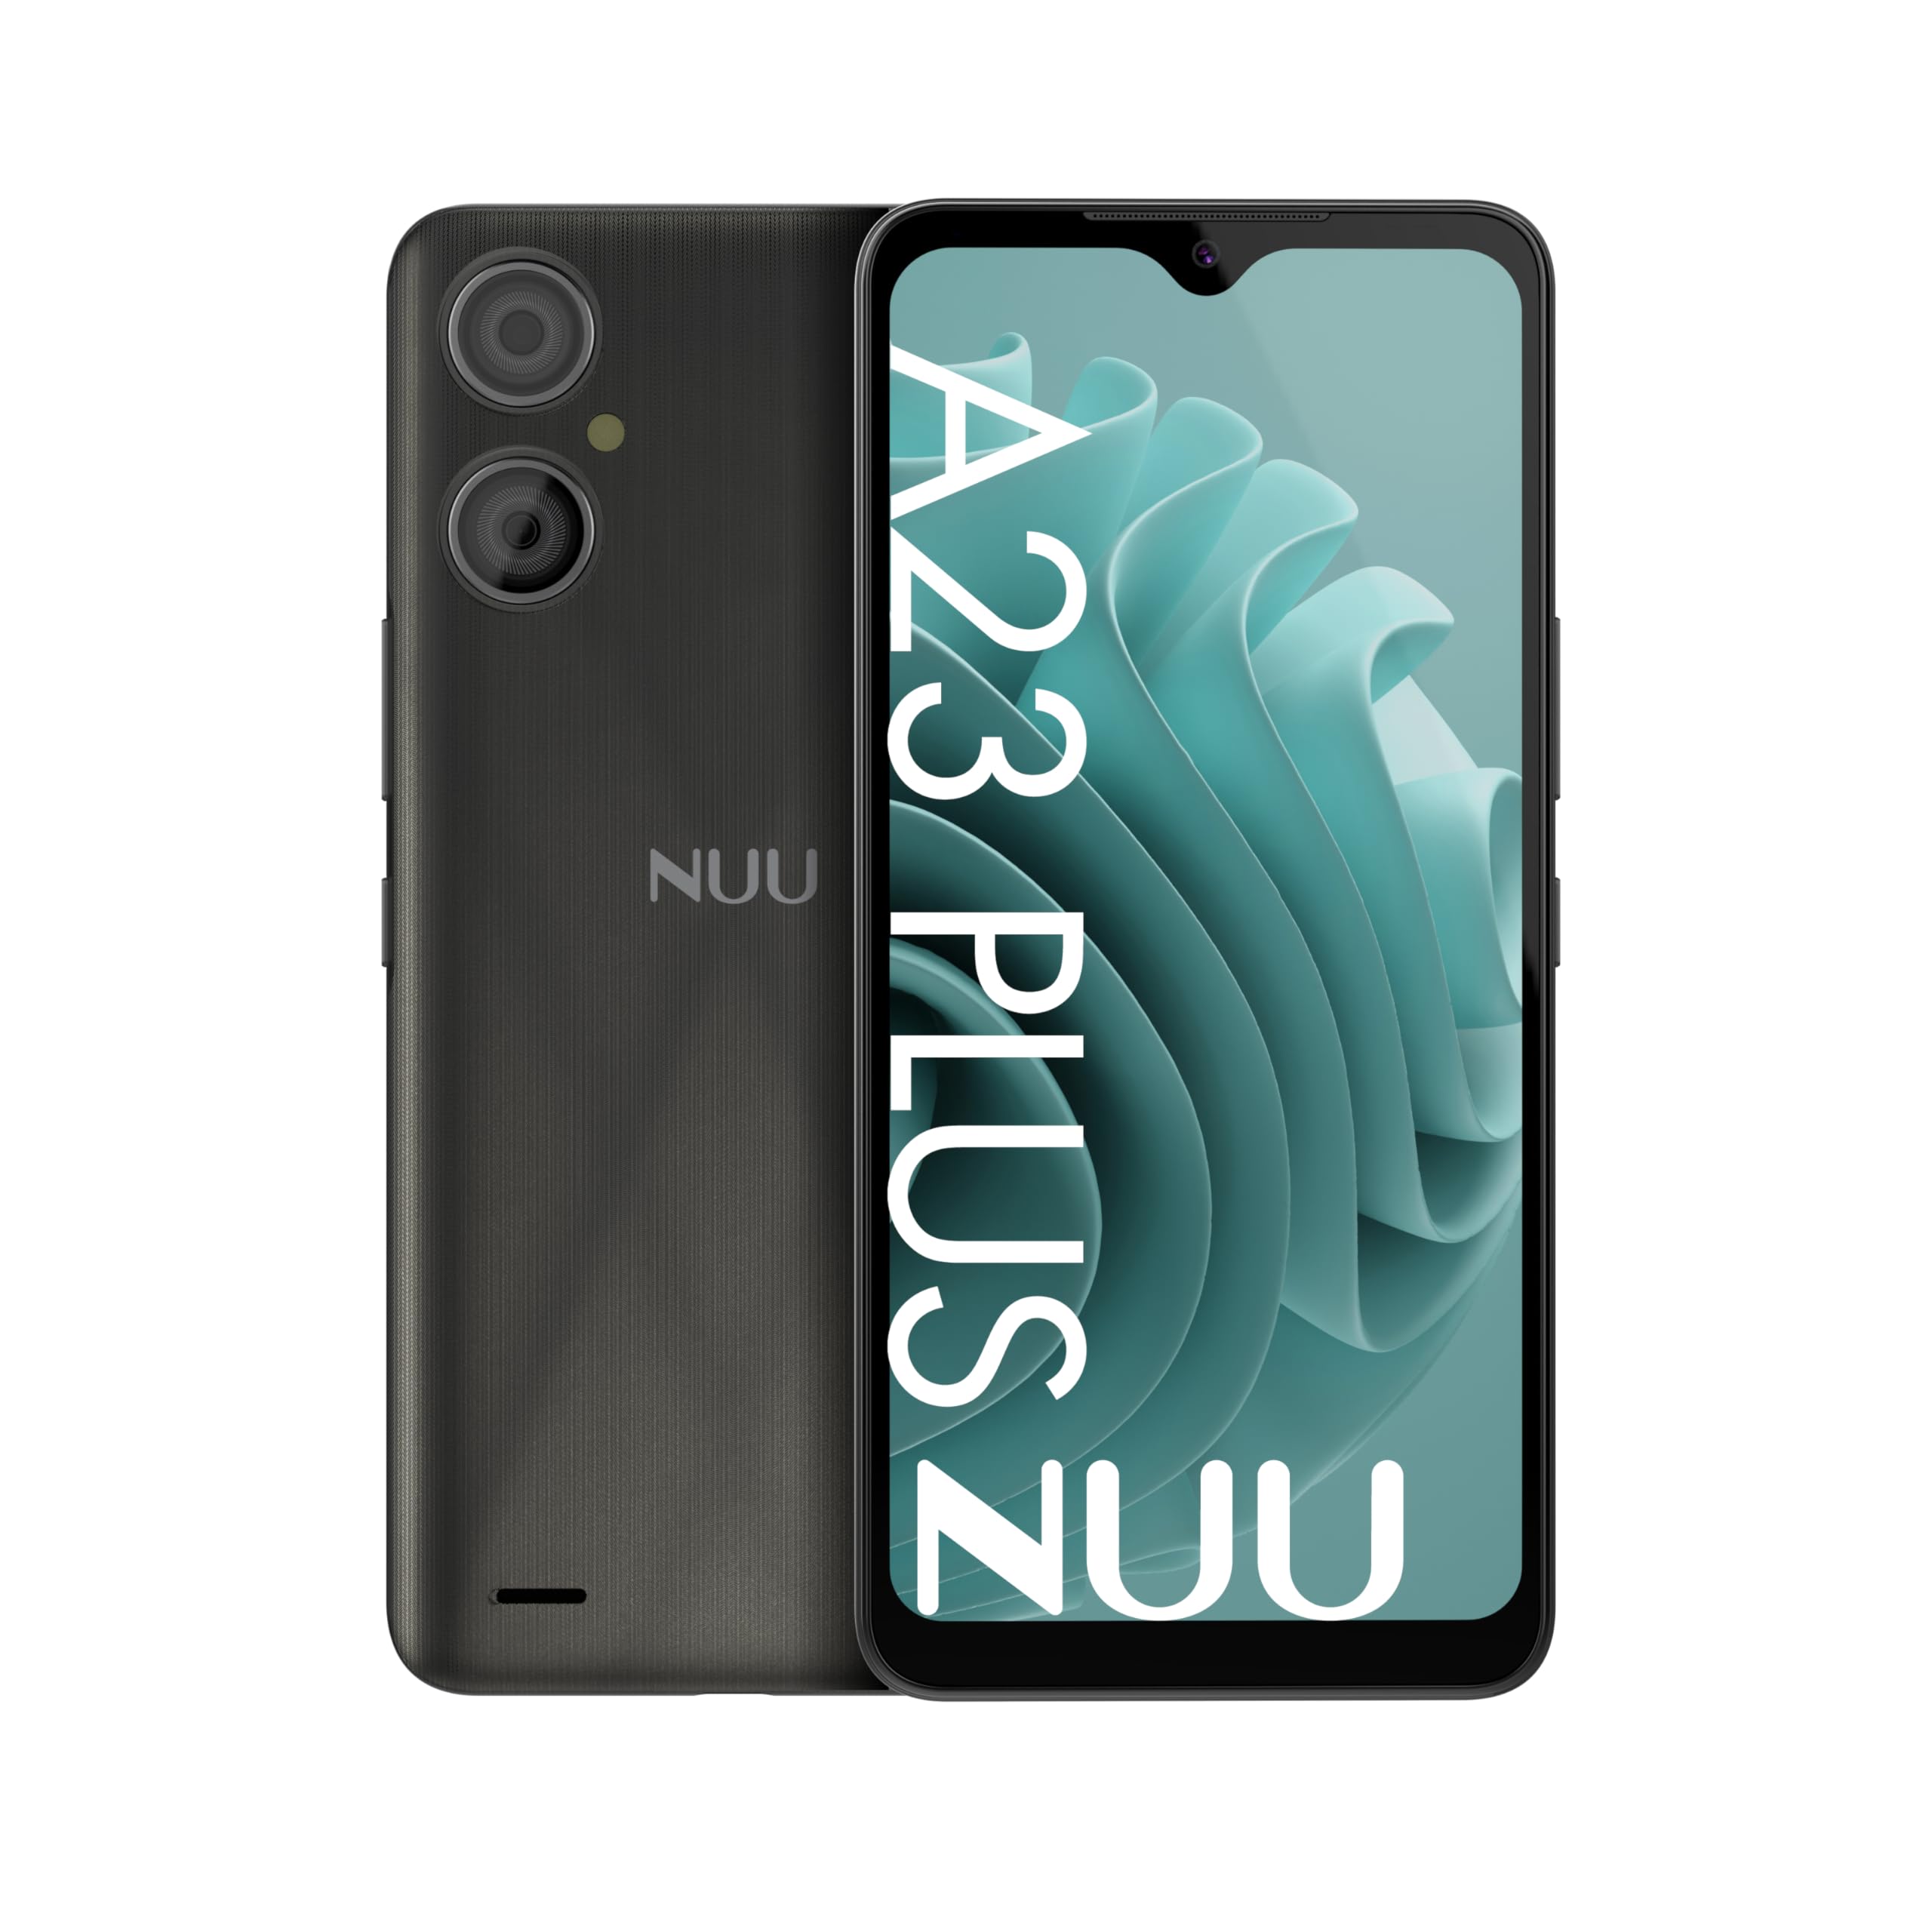 NUU A23 Plus Unlocked Android Cell Phone, Dual SIM 4G, 6.3